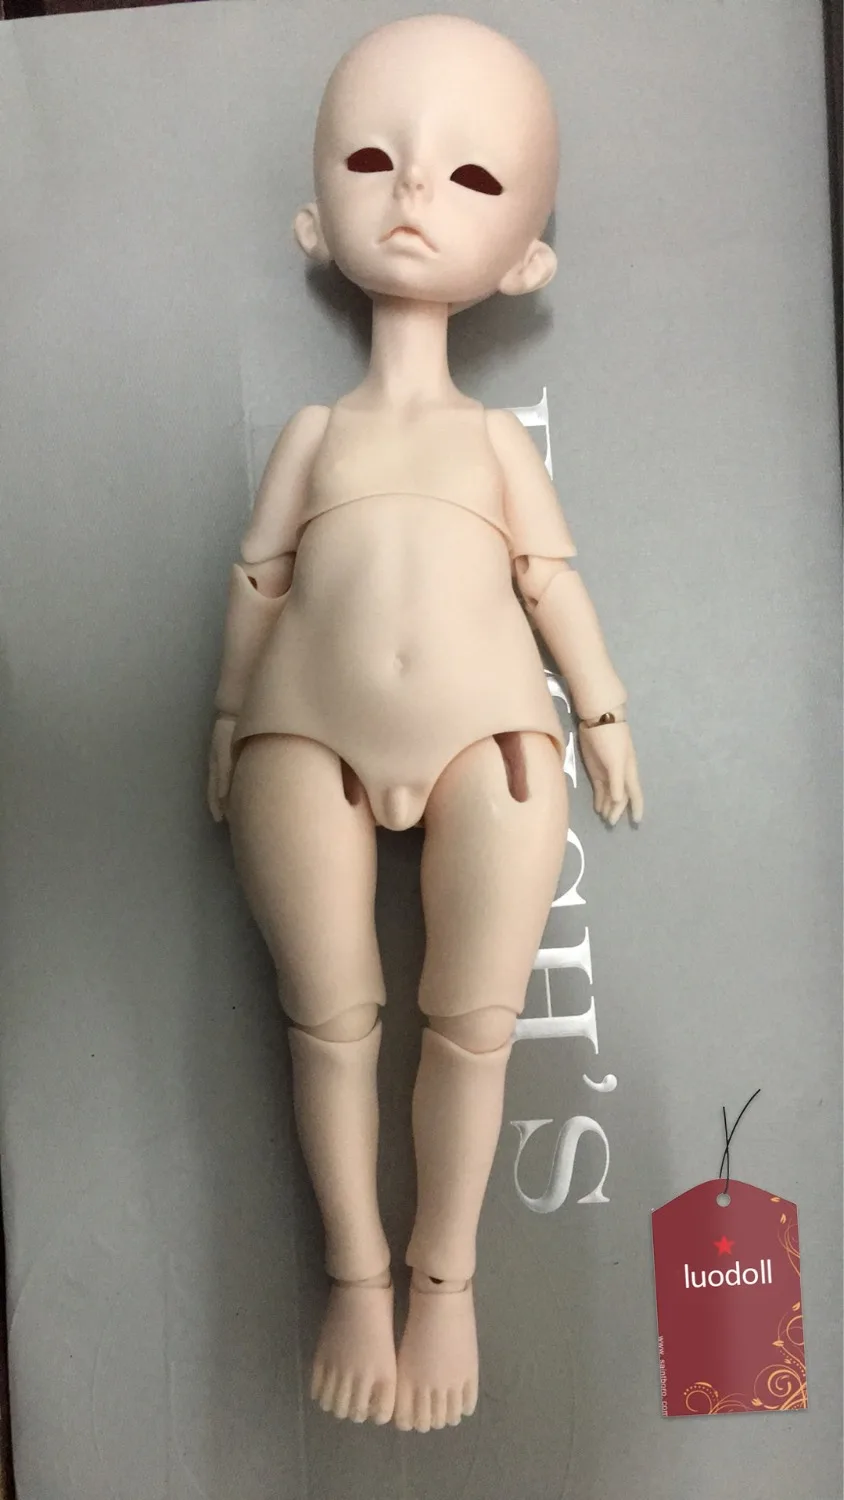 luodoll faust aliexpress